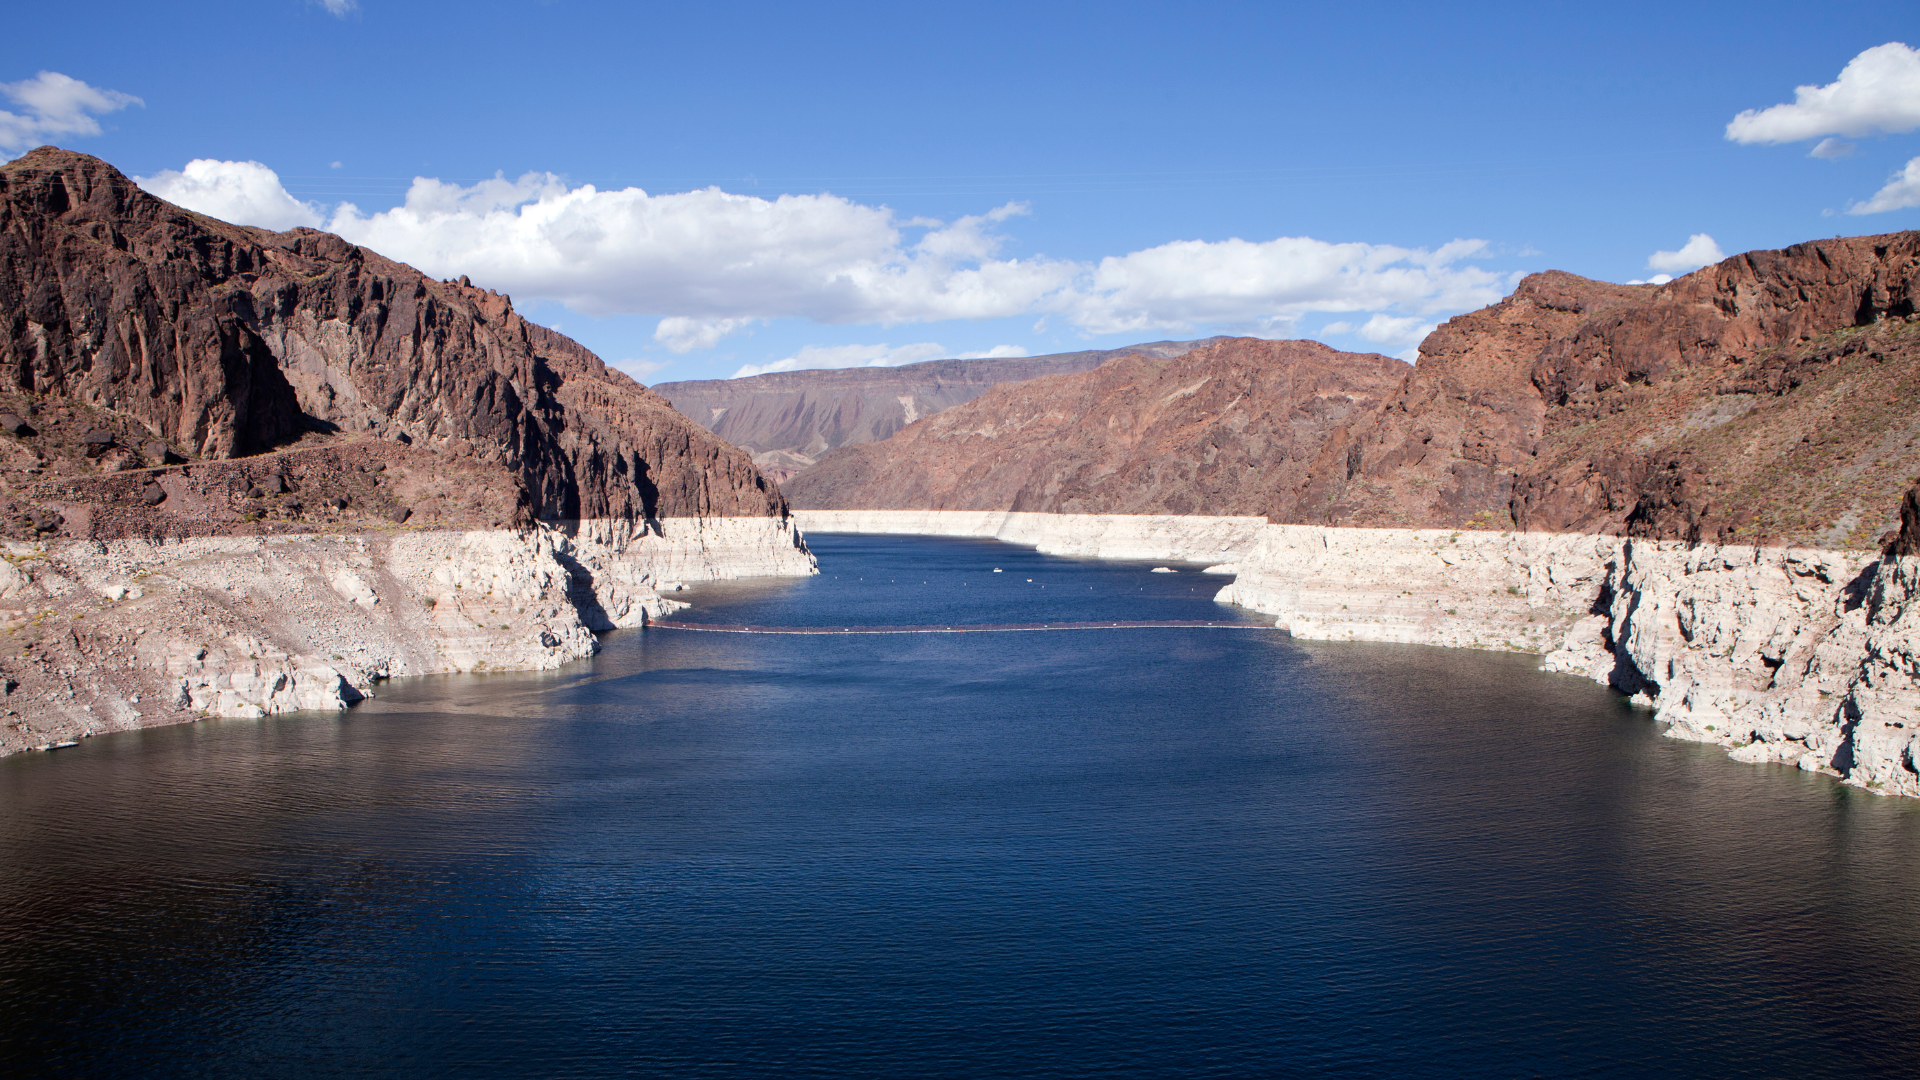 Considerations and Regional Impacts of Water Cuts in the Lower Colorado River